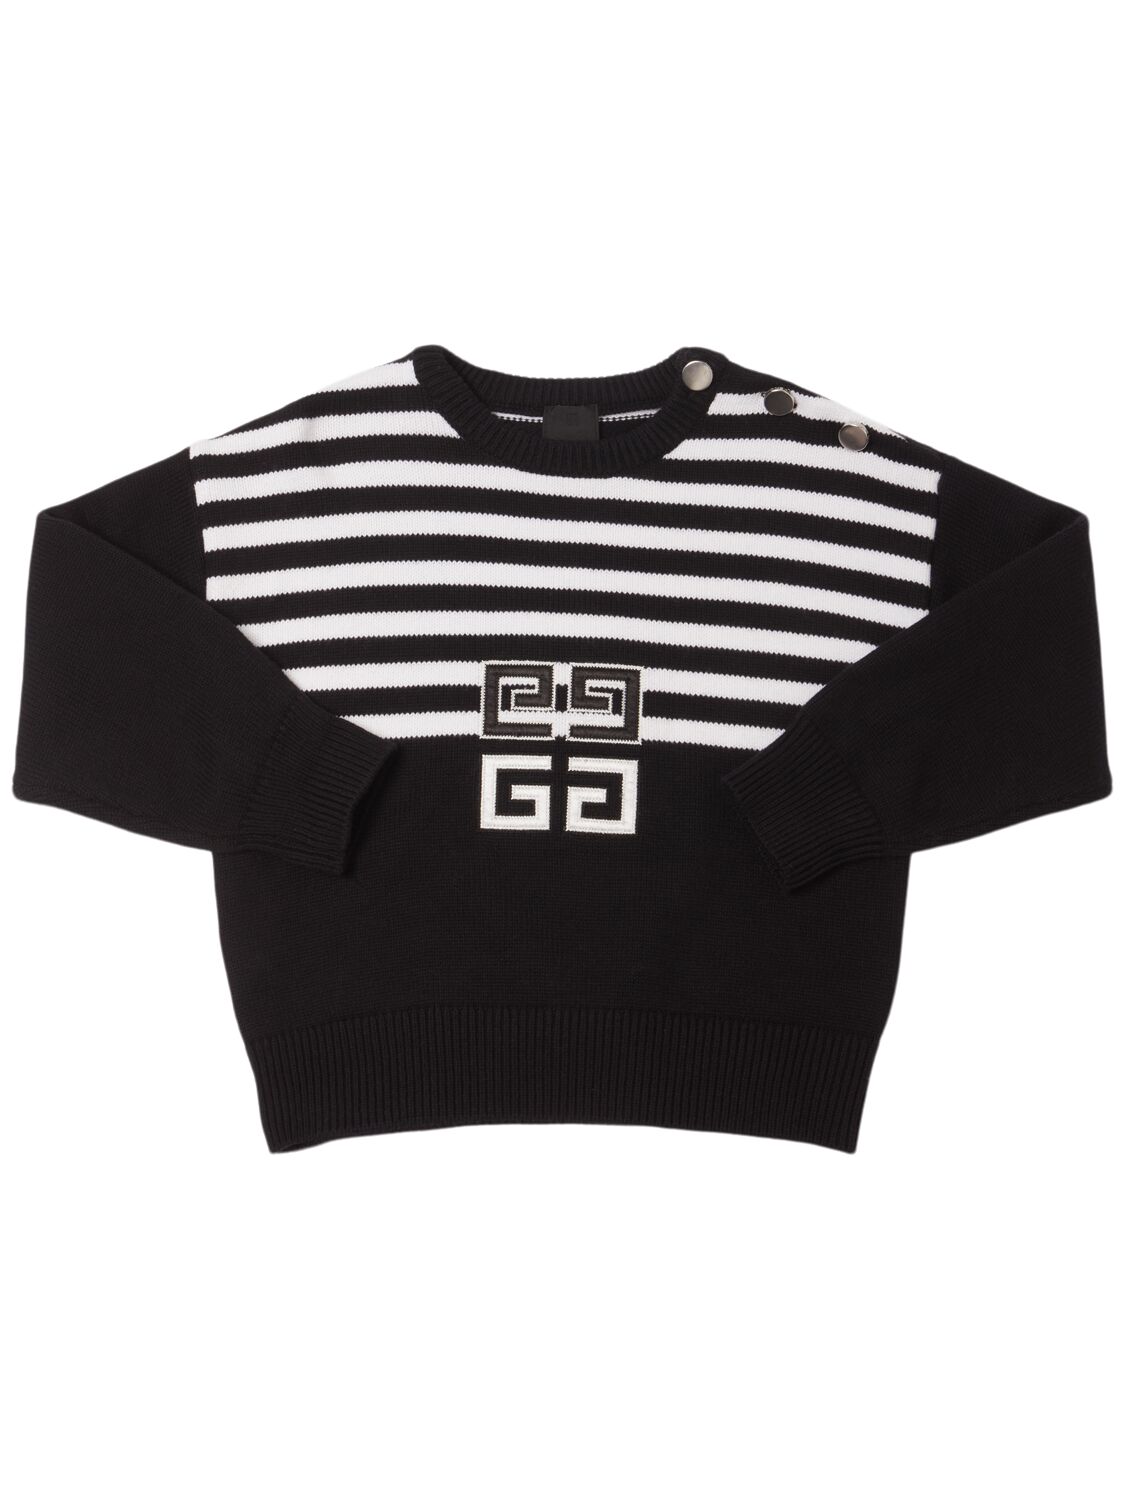 Givenchy Cotton Blend Knit Sweater In Black